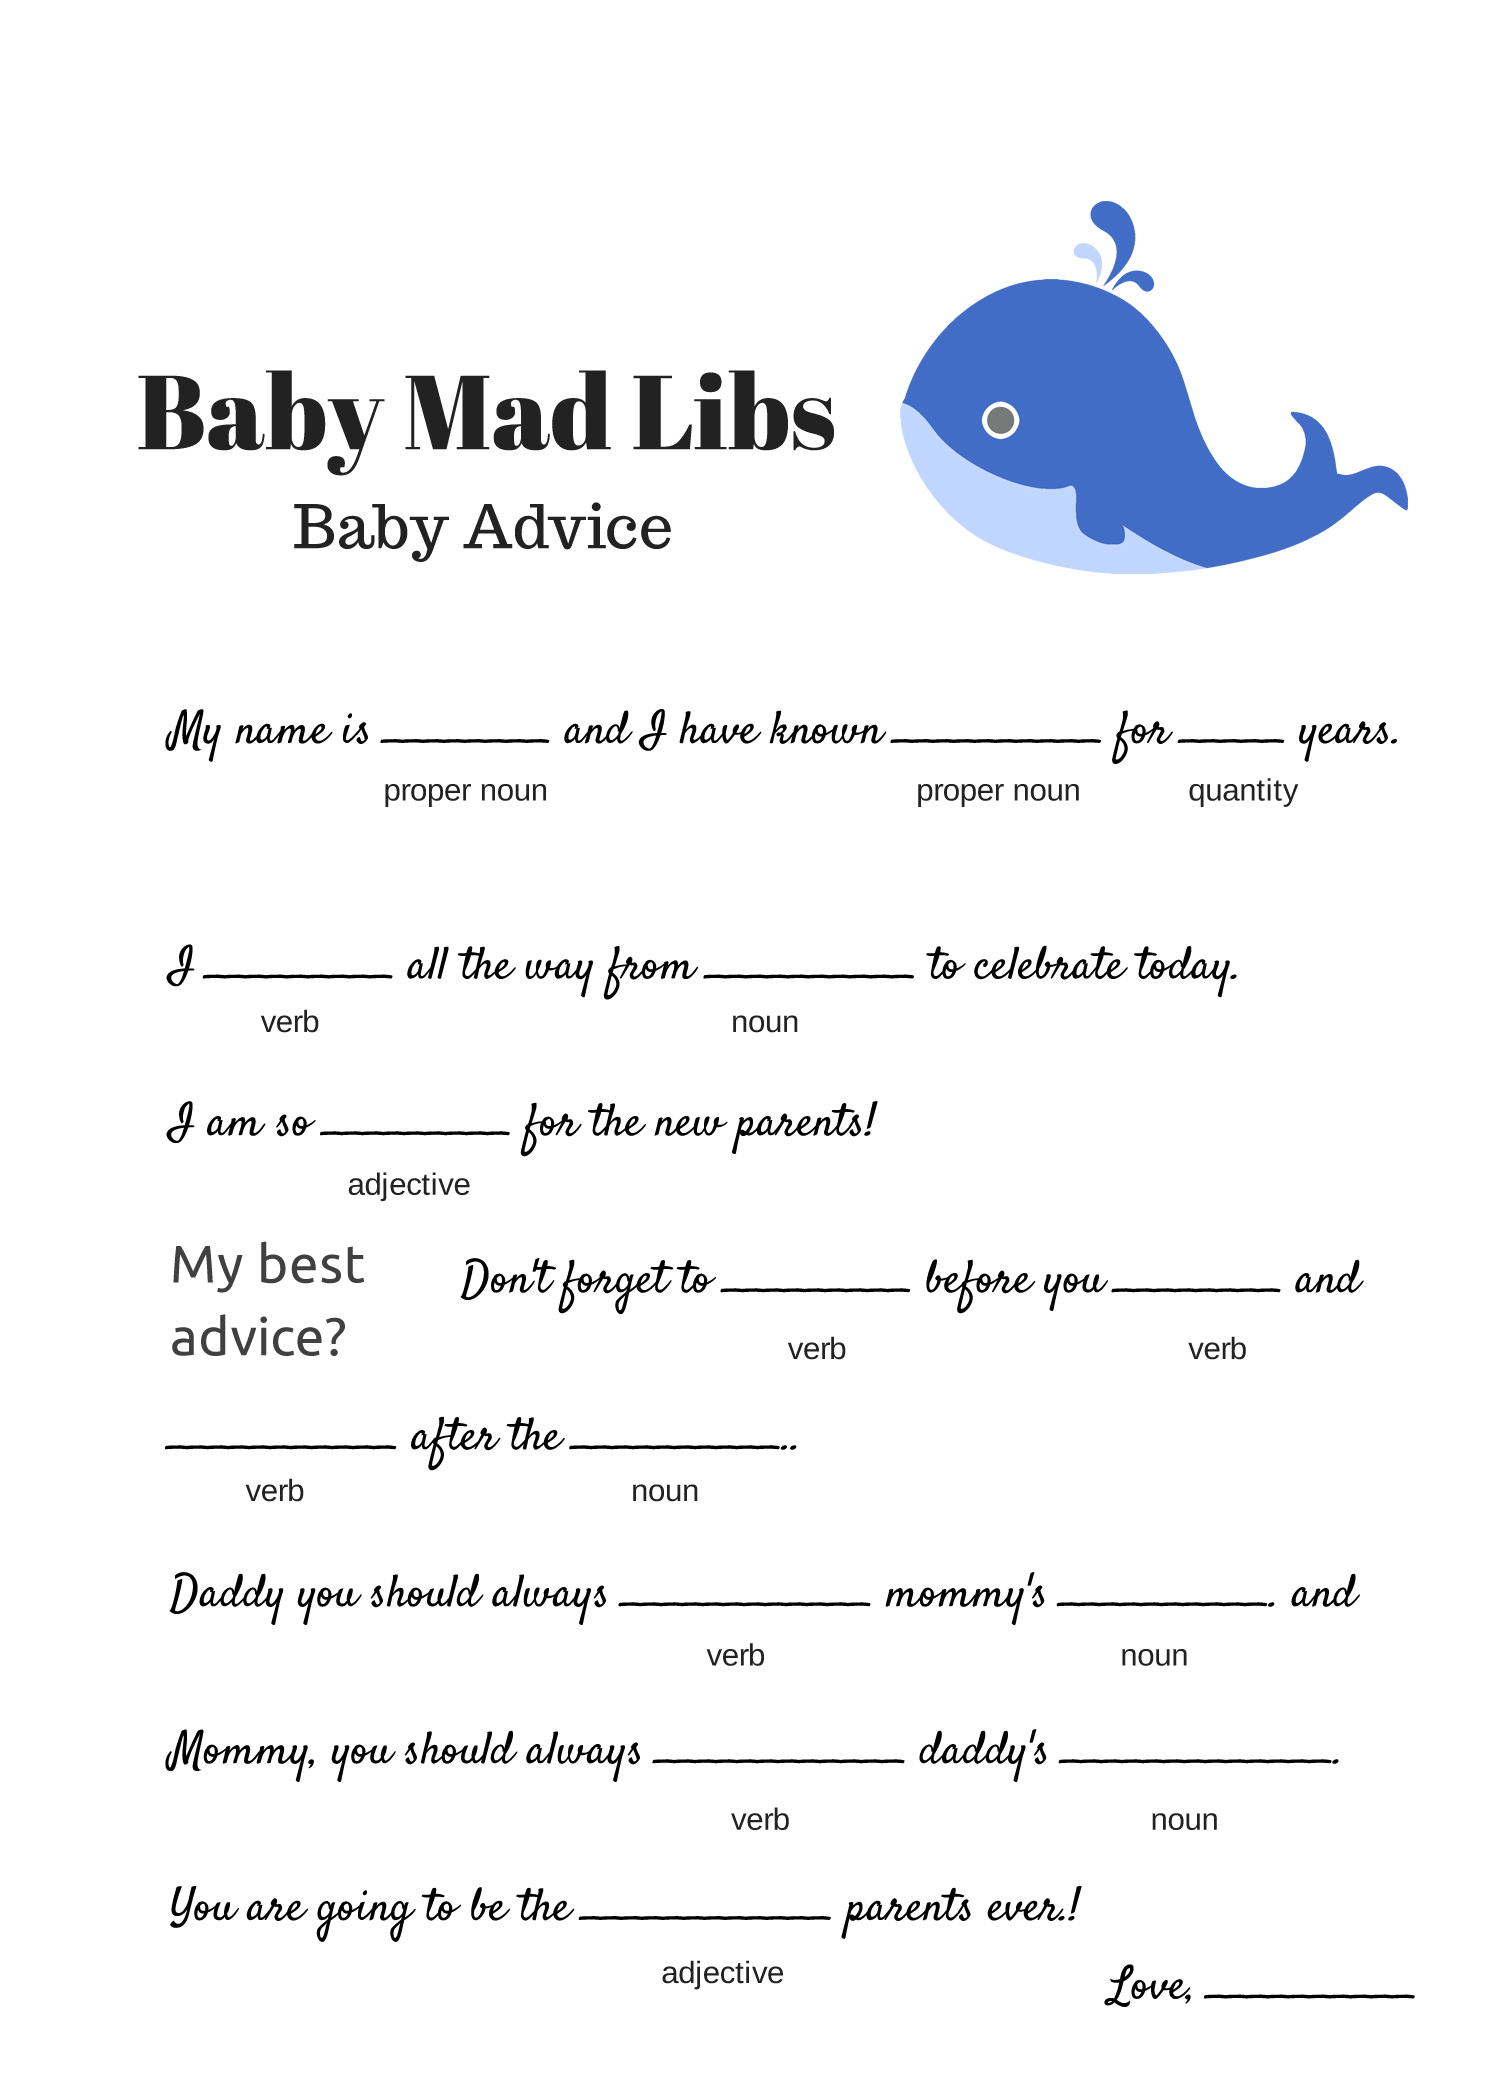 Free Baby Mad Libs Game - Baby Advice - Baby Shower Ideas - Themes - Free Printable Baby Shower Games For Twins